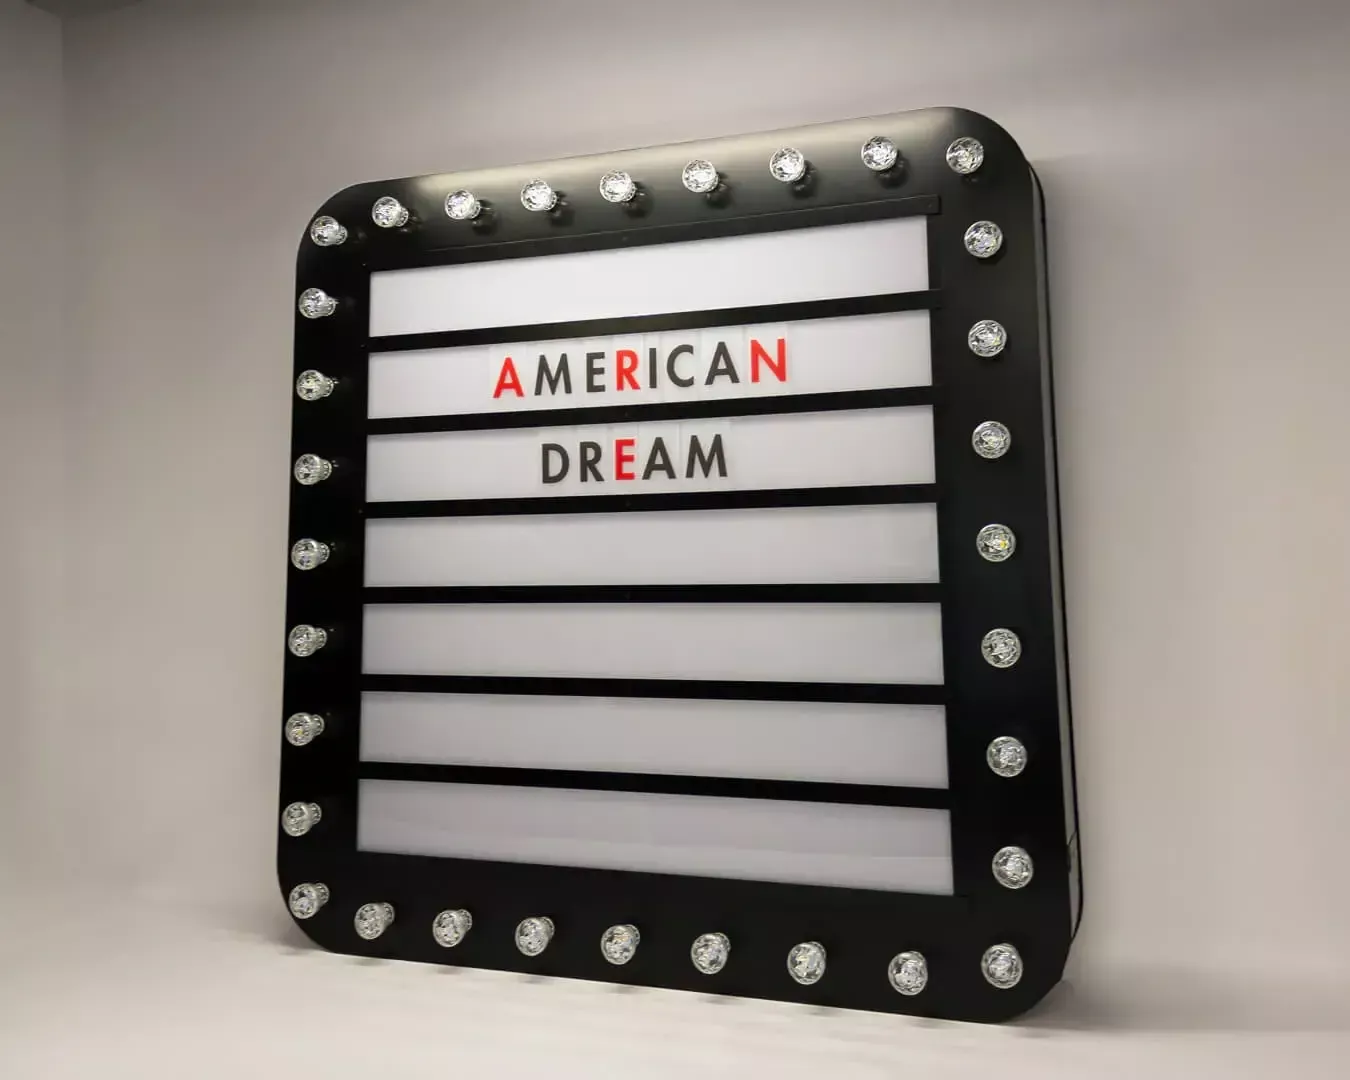 American Dream - A light bulb board, with changeable letters, in retro style.